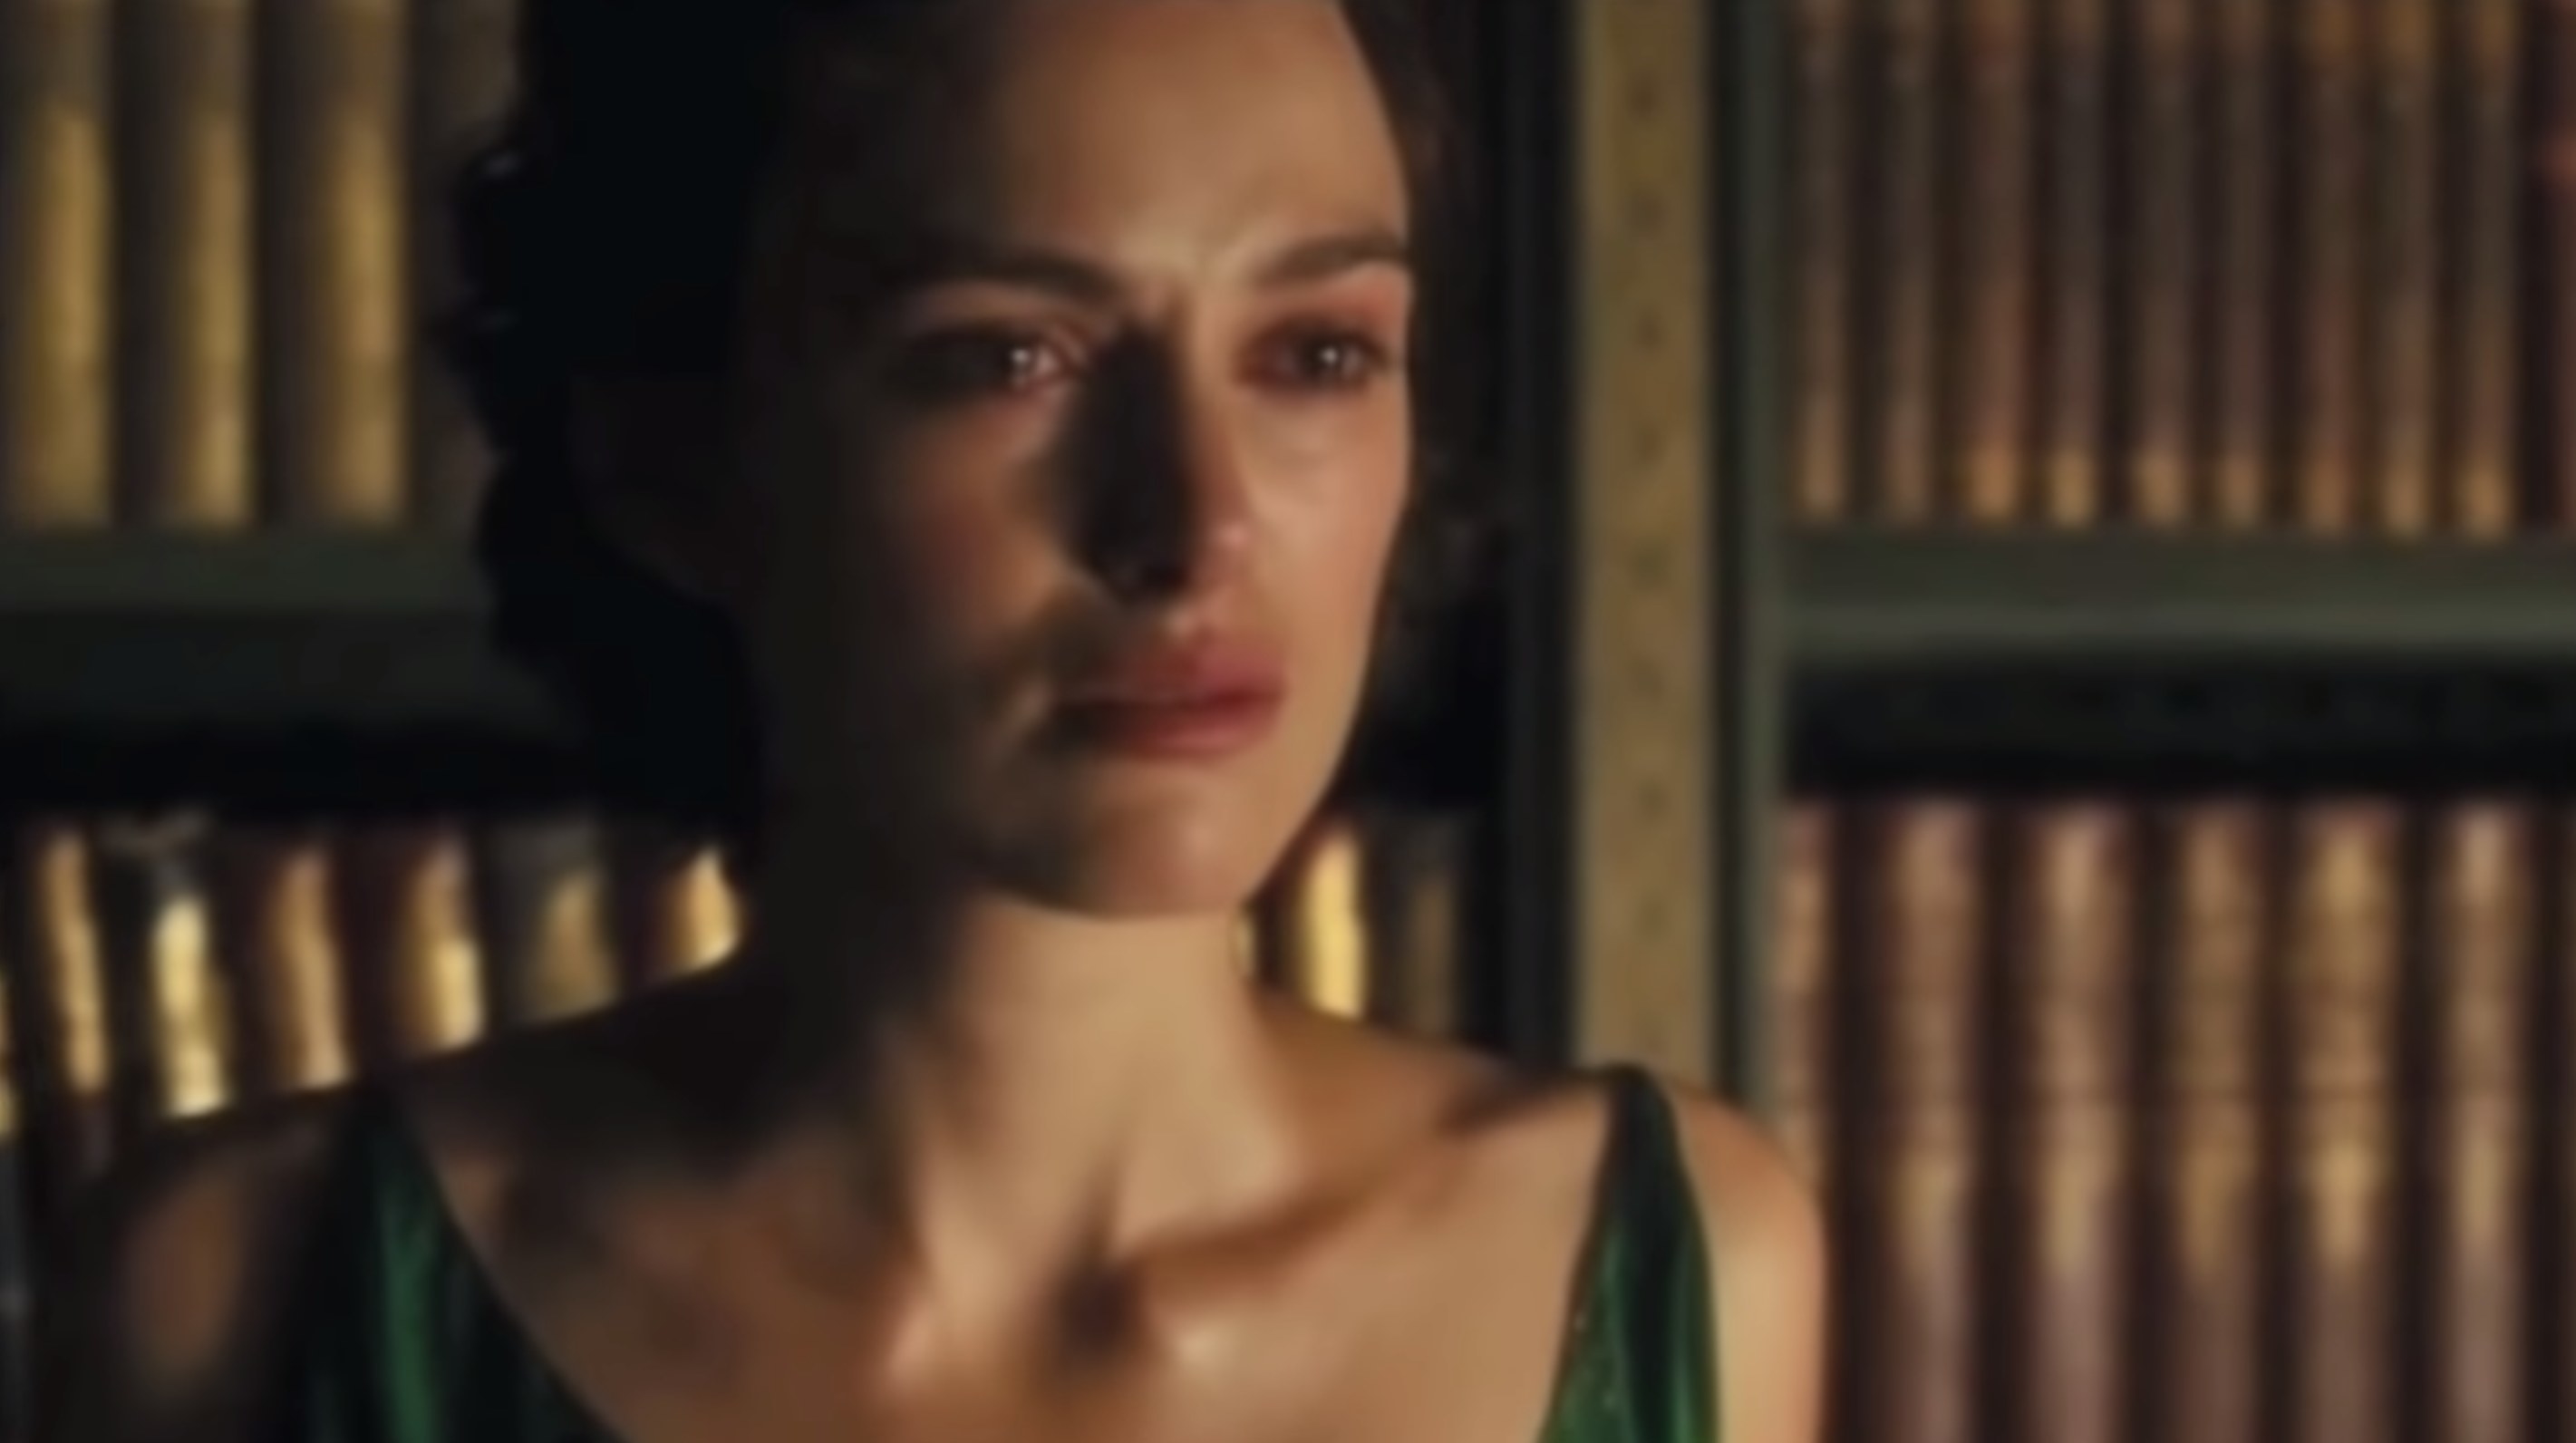 A woman played by Keira Knightley crying